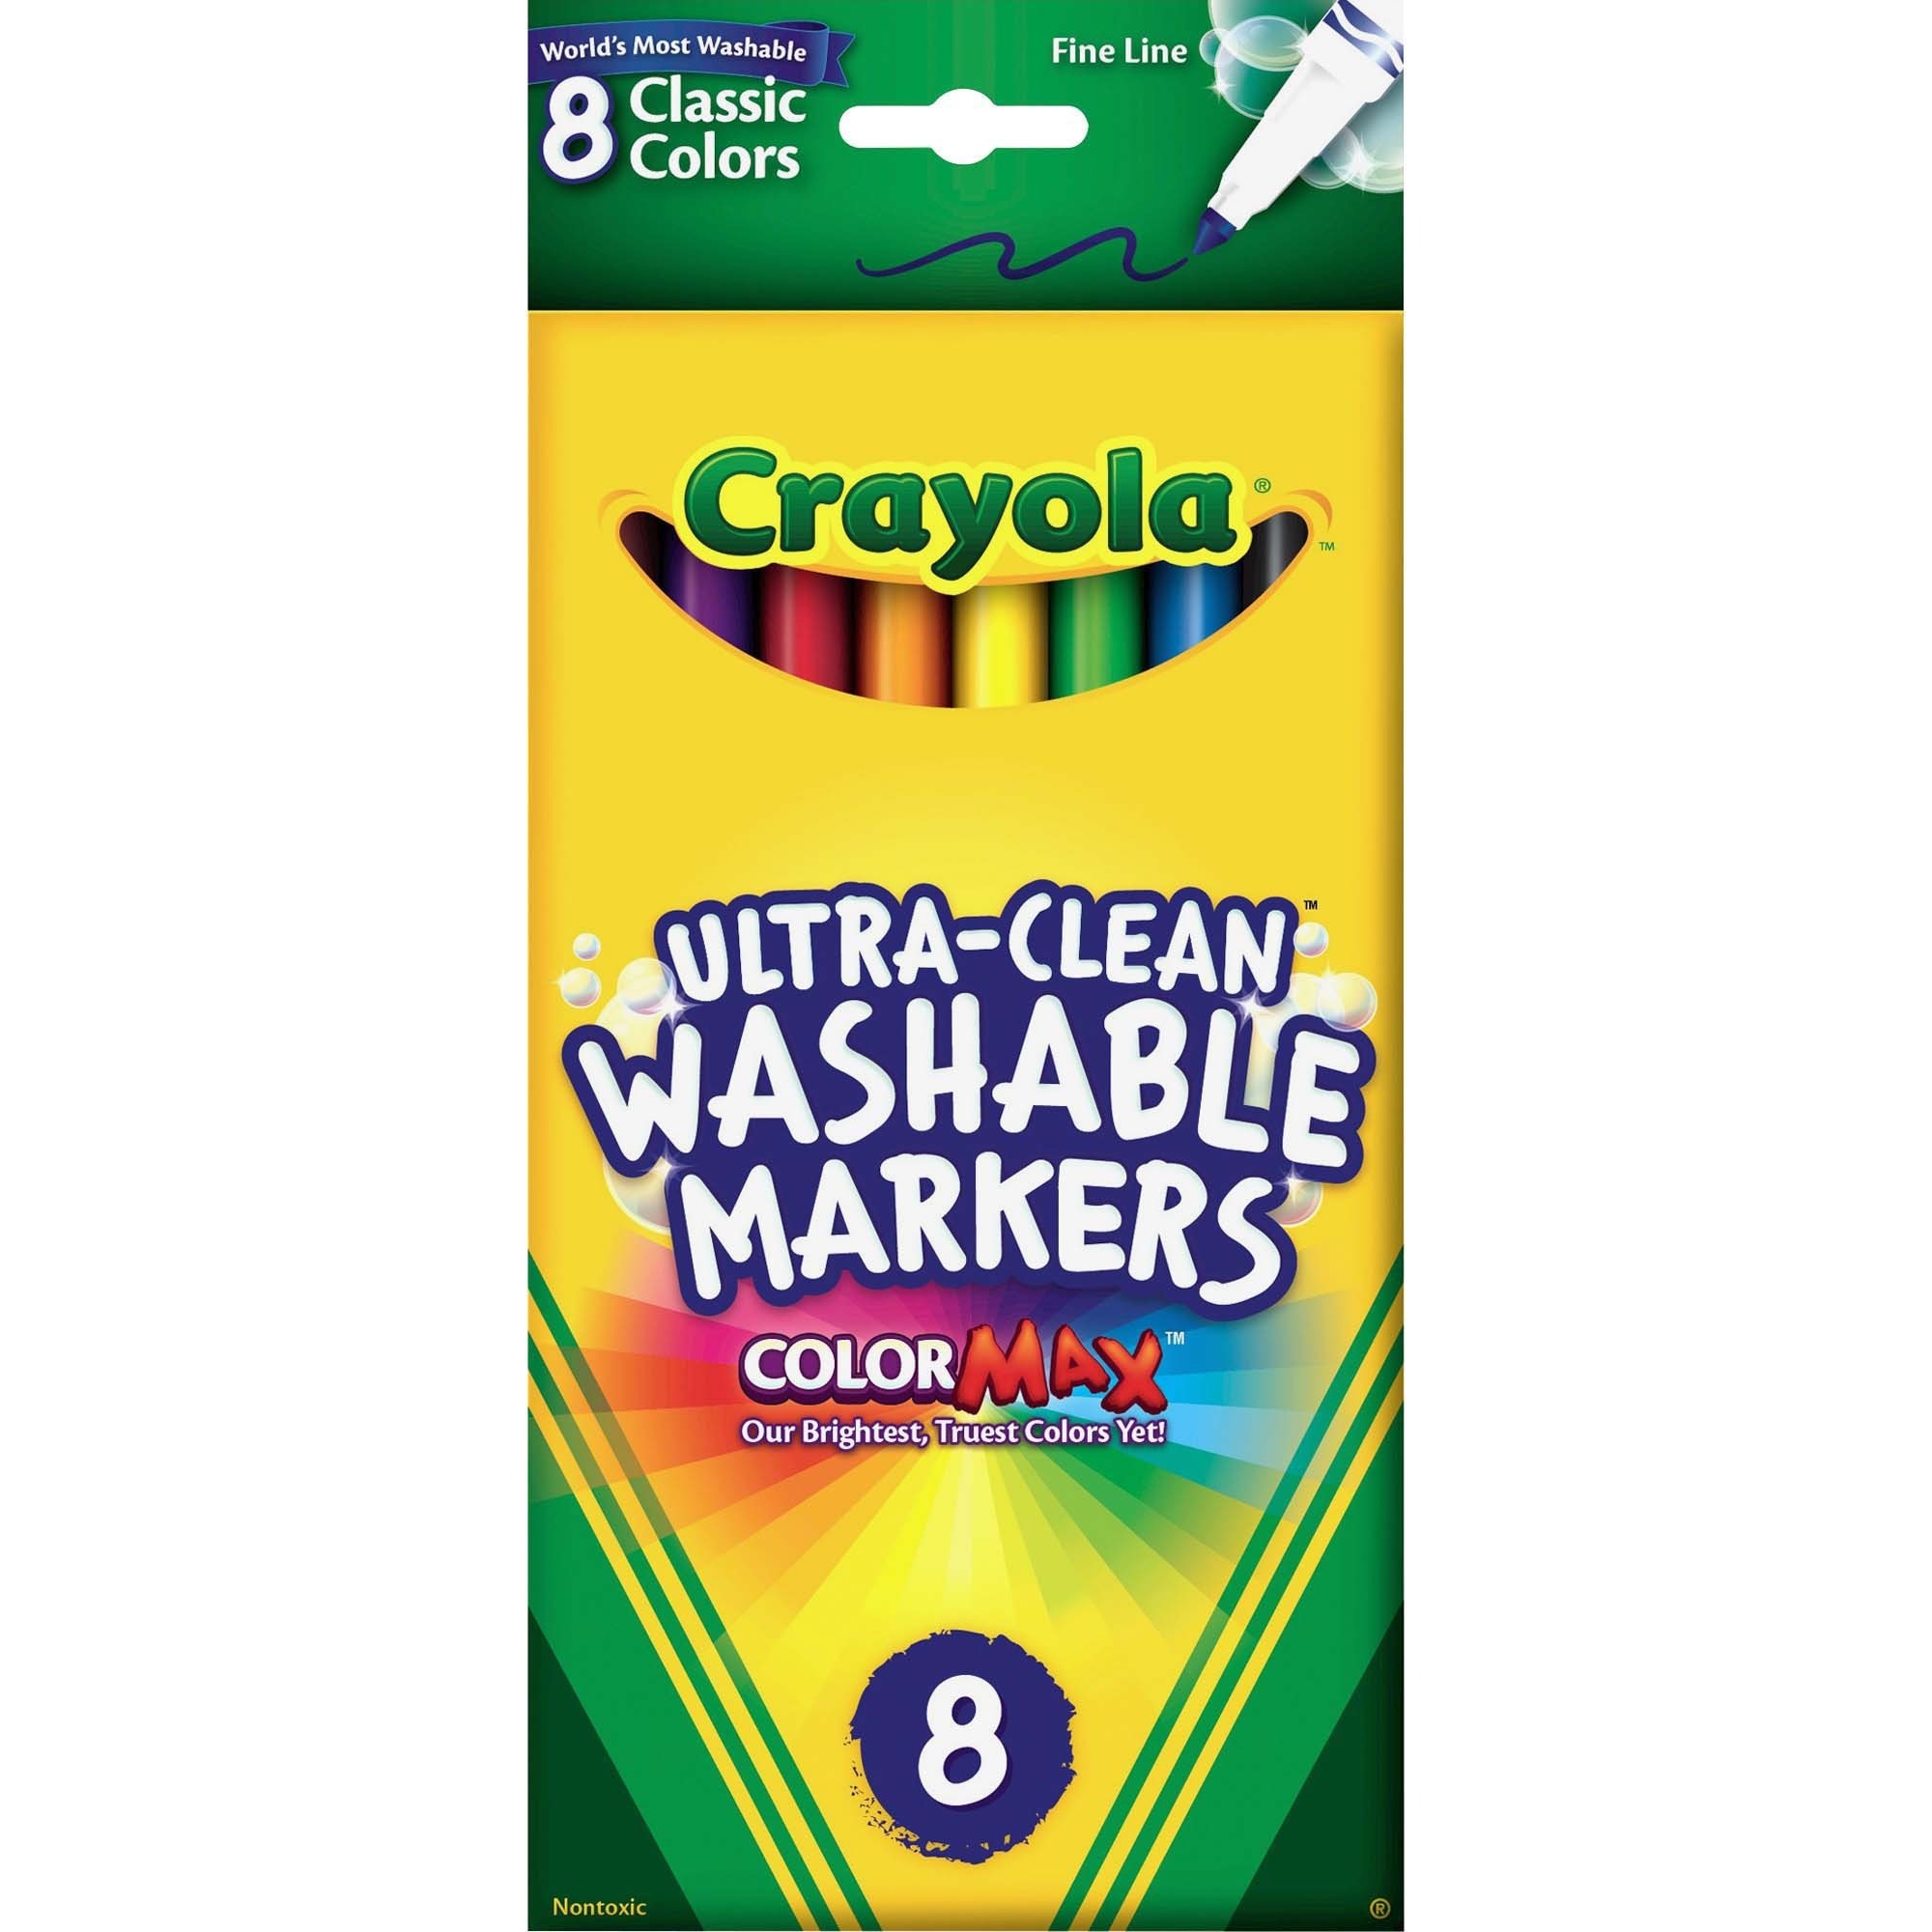 Crafts　Office　Set　Reidsville's　Brown,　Style　Orange,　Green,　LLC　Washable　Marker　Point　Crayola　Black　Yellow,　Crayola,　Arts　B　Broad　Conical　Red,　Marker　Water　Violet,　Point　Blue,　Marker　Classic　City